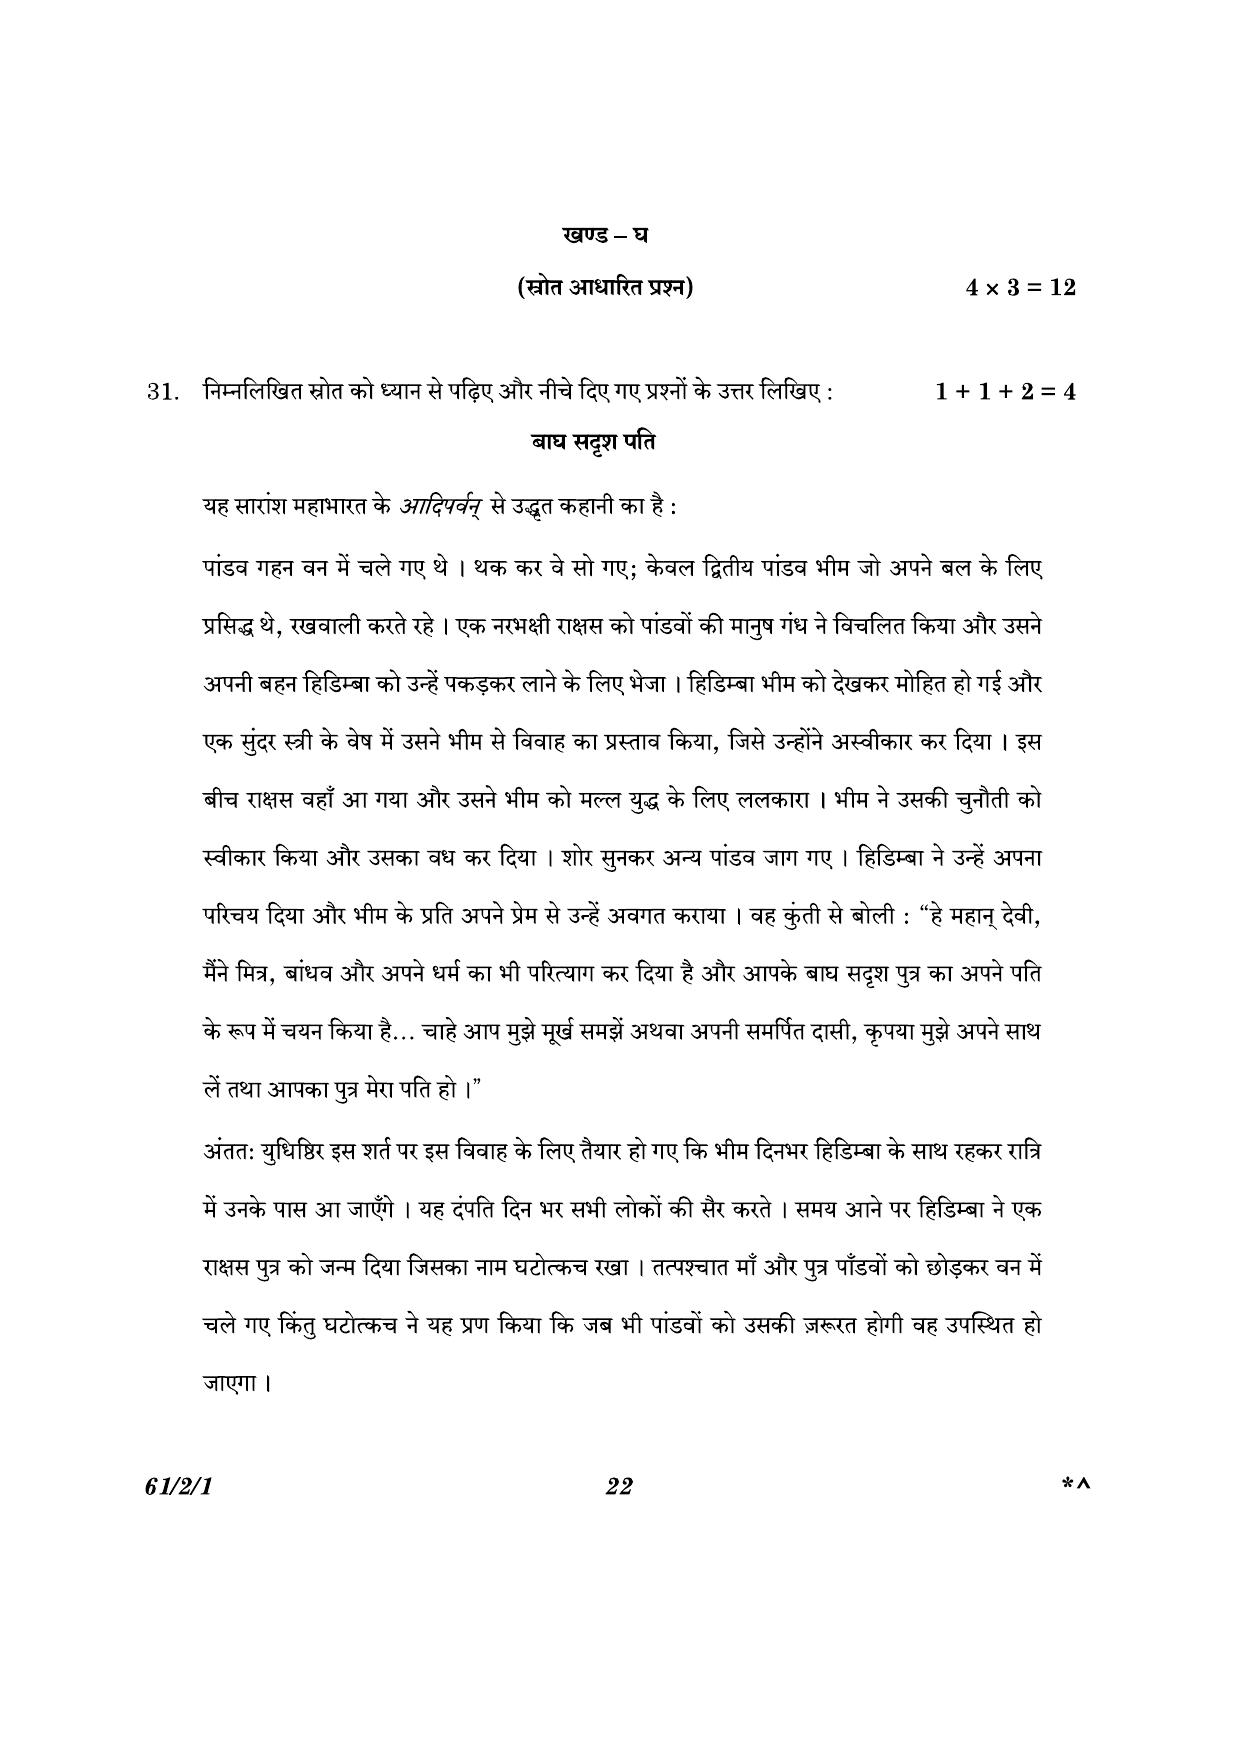 CBSE Class 12 61-2-1 History 2023 Question Paper - Page 22